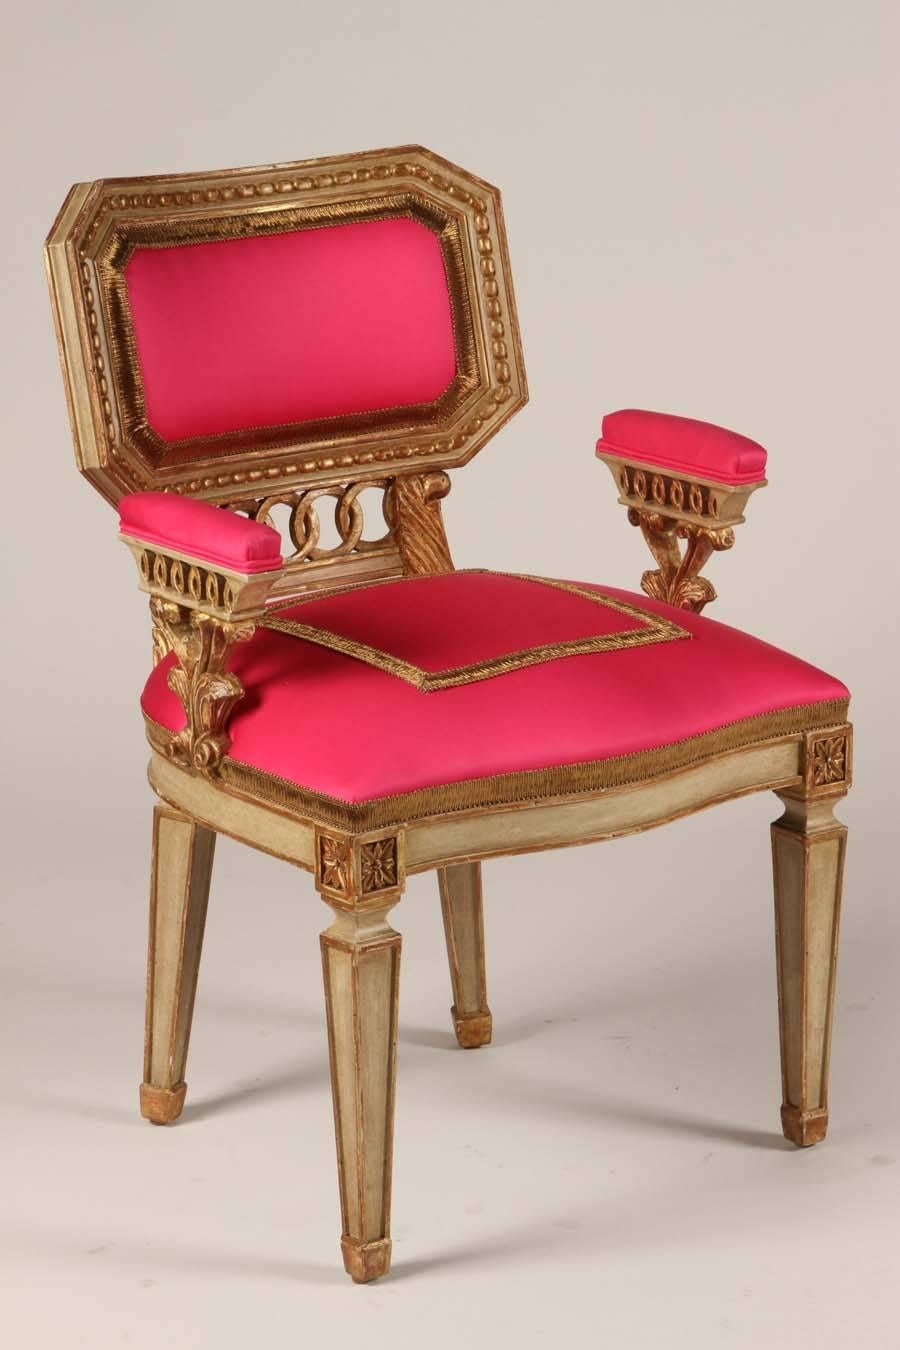 Stunning Baltic style chairs. Recently upholstered in pink Manuel Canovas silk and trimmed in (Janet Yonaty) gold braid. There is a third un-upholstered matching frame available for purchase.